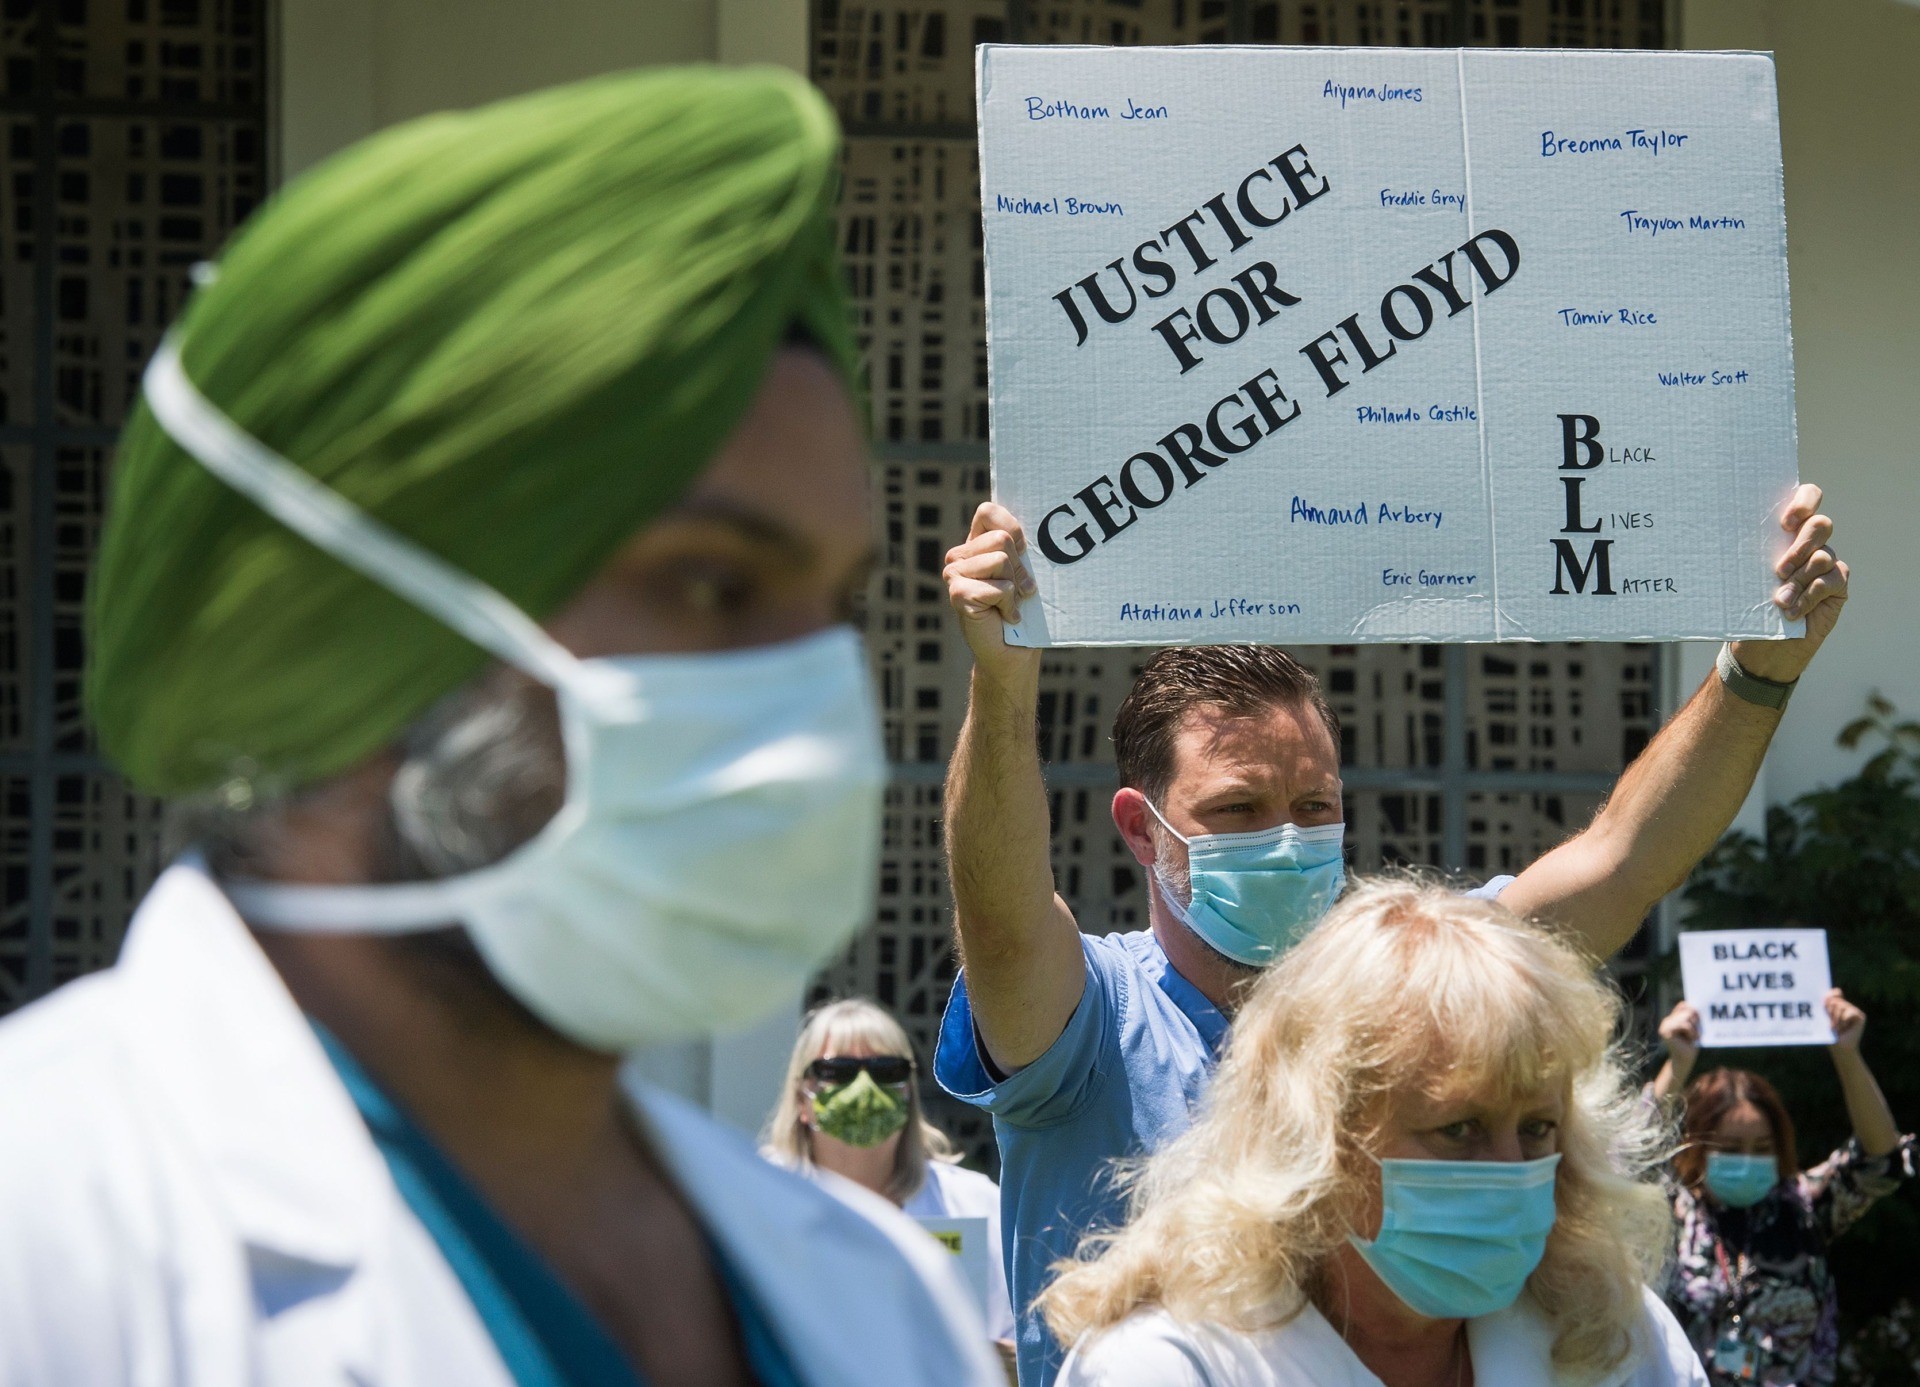 Doctors, nurses and other health care workers participate in a "White Coats for Black Lives" event in solidarity with George Floyd and other black Americans killed by police officers, at the Queen of the Valley Hospital in West Covina, California on June 11, 2020. - George Floyd's killing by a police officer touched off worldwide protests over racial and social injustice. (Photo by Mark RALSTON / AFP) (Photo by MARK RALSTON/AFP via Getty Images)